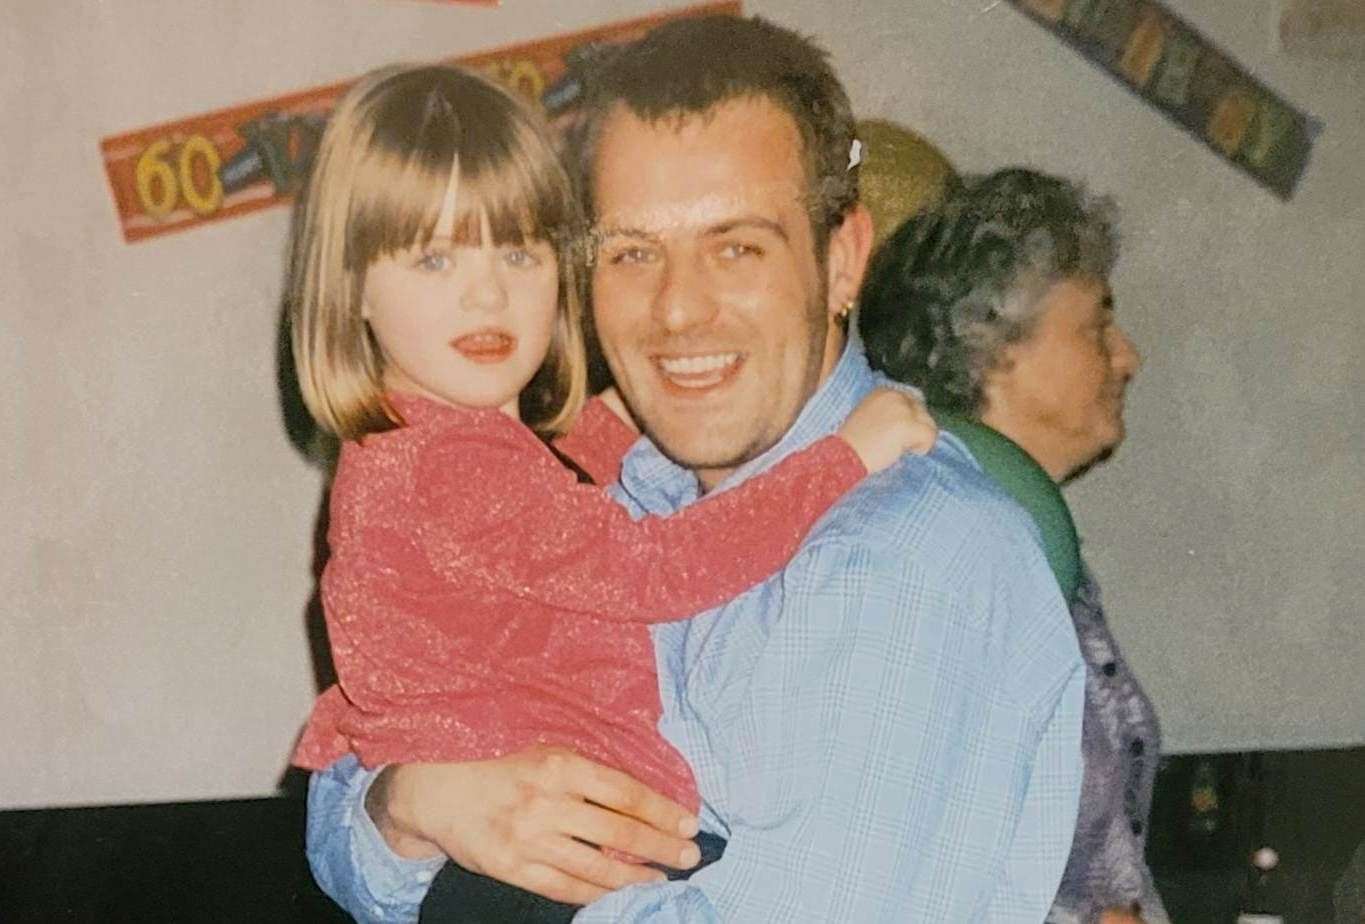 Lauren as a child with her dad